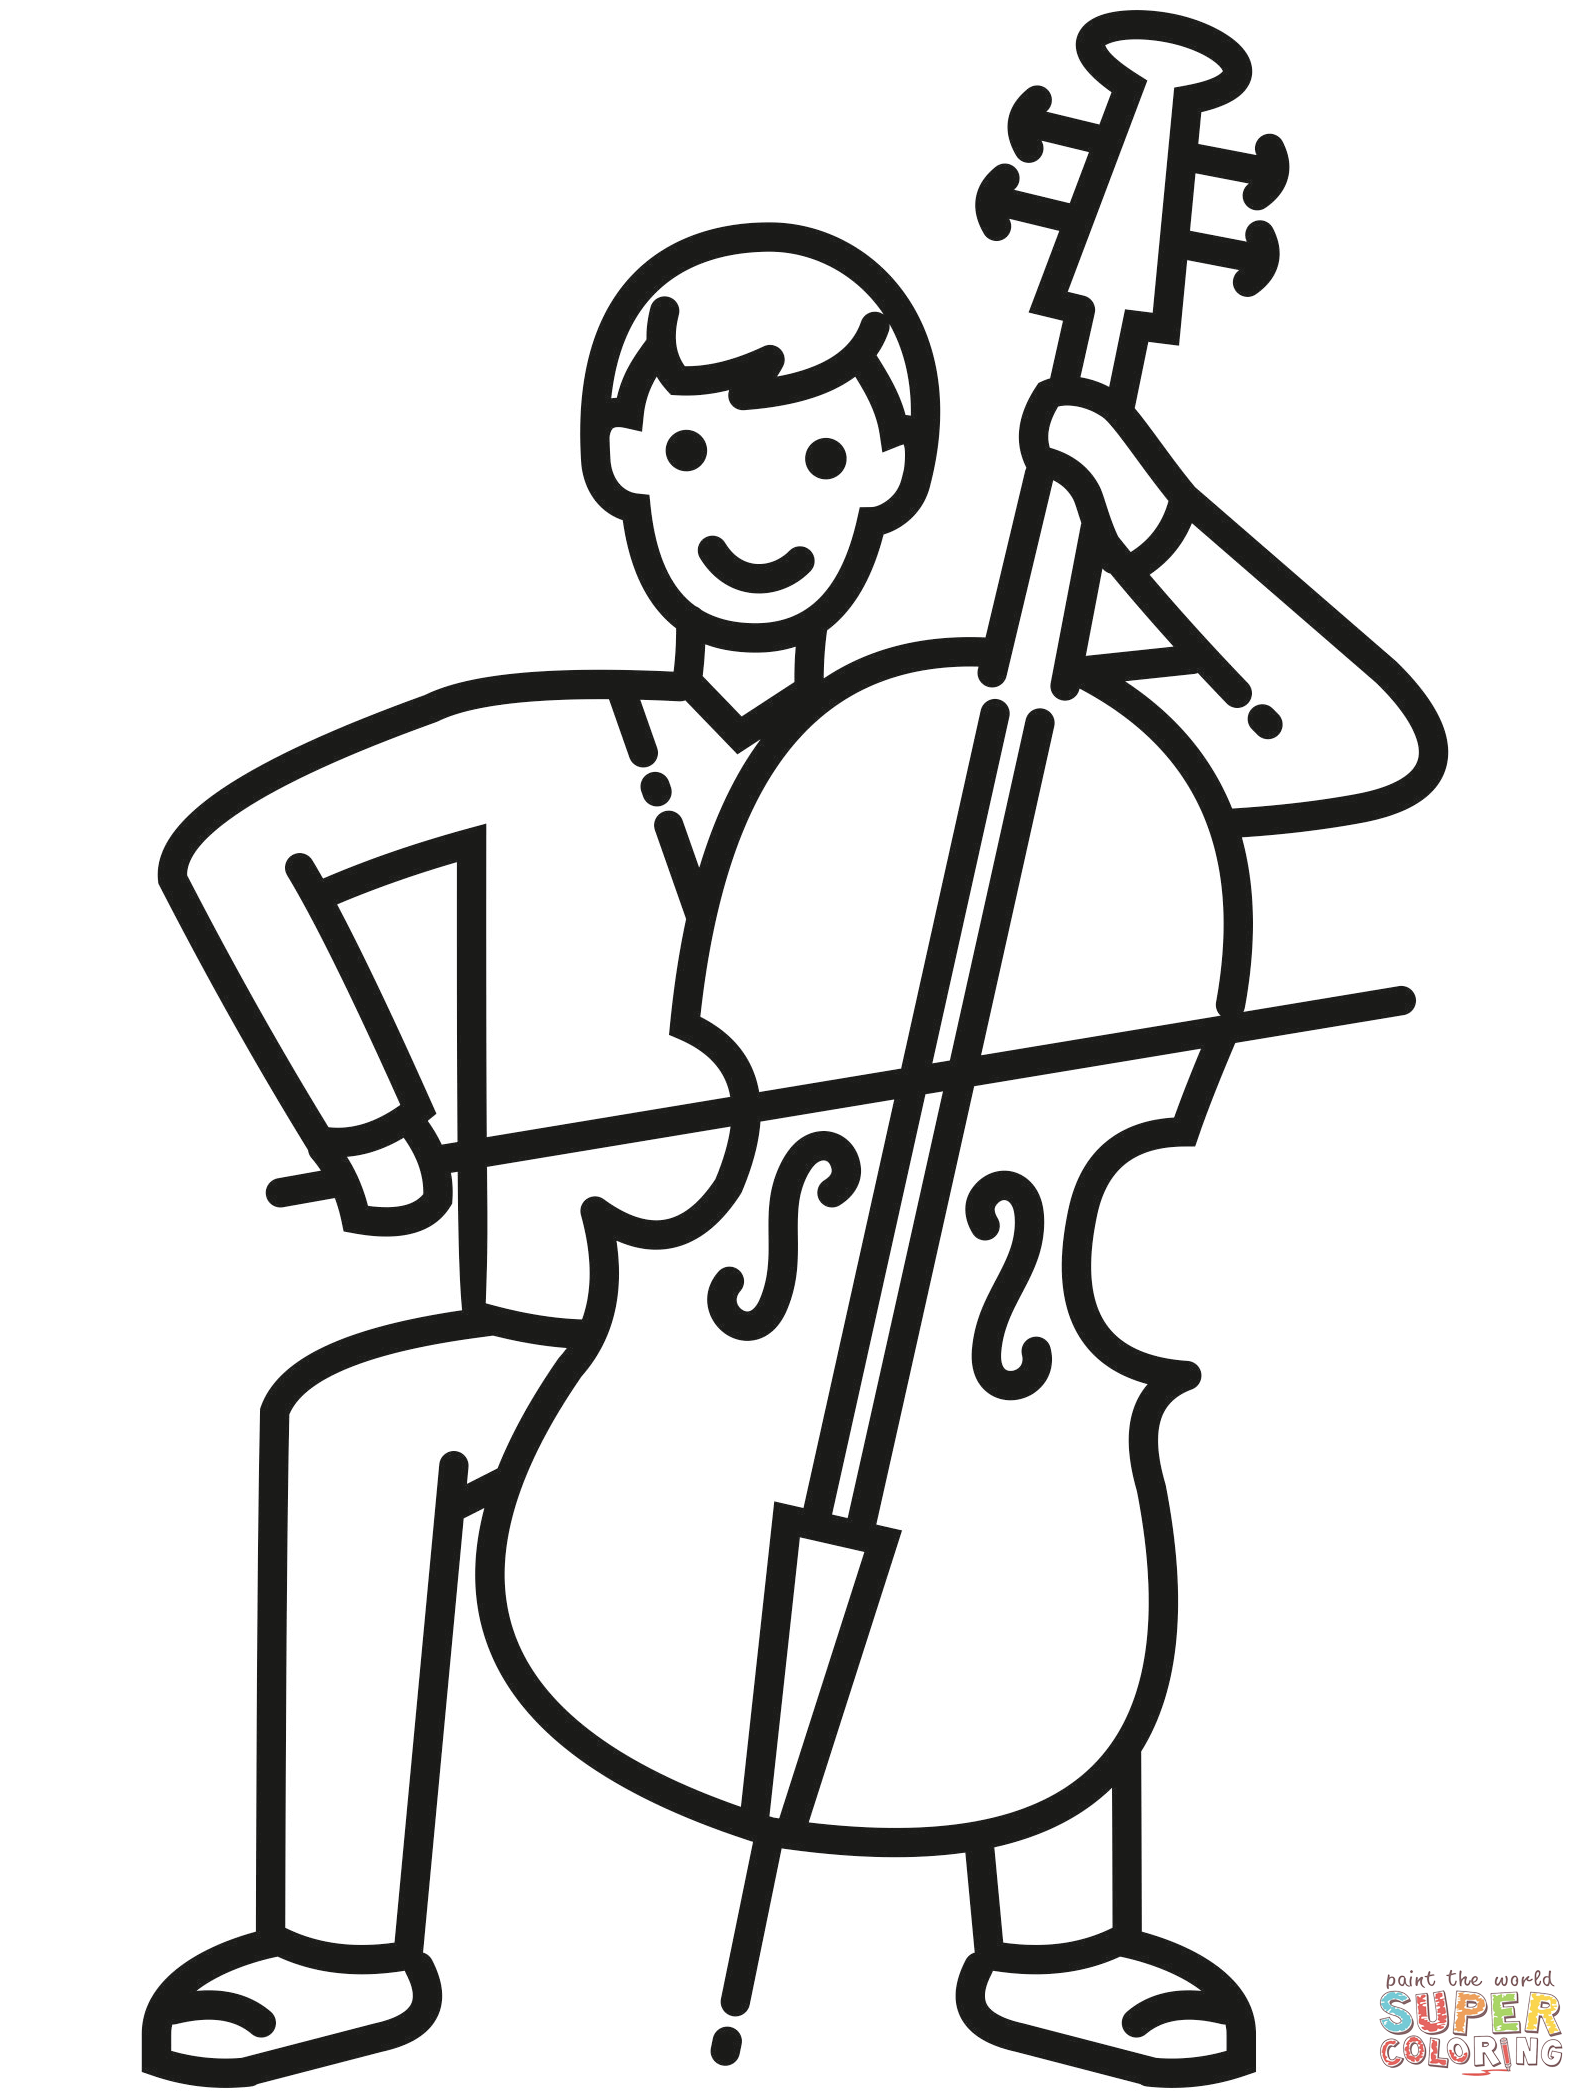 Cellist coloring page | Free Printable Coloring Pages